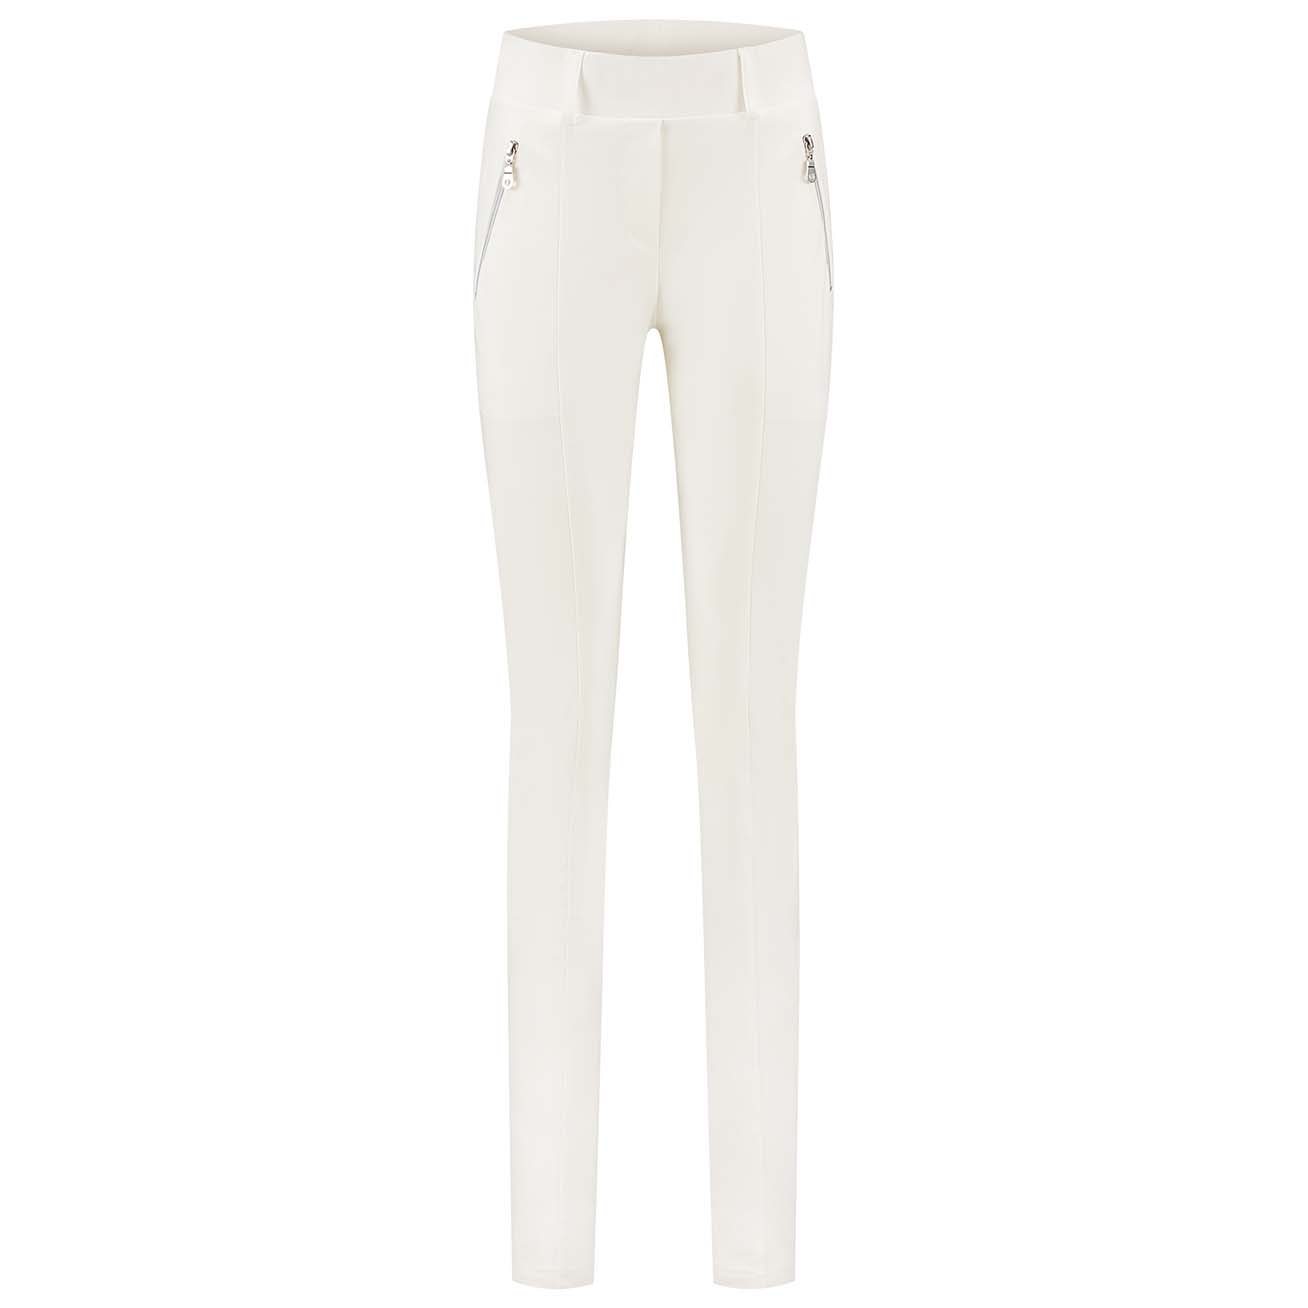 Longlady Z Broek Travel Strong Zip Offwhite